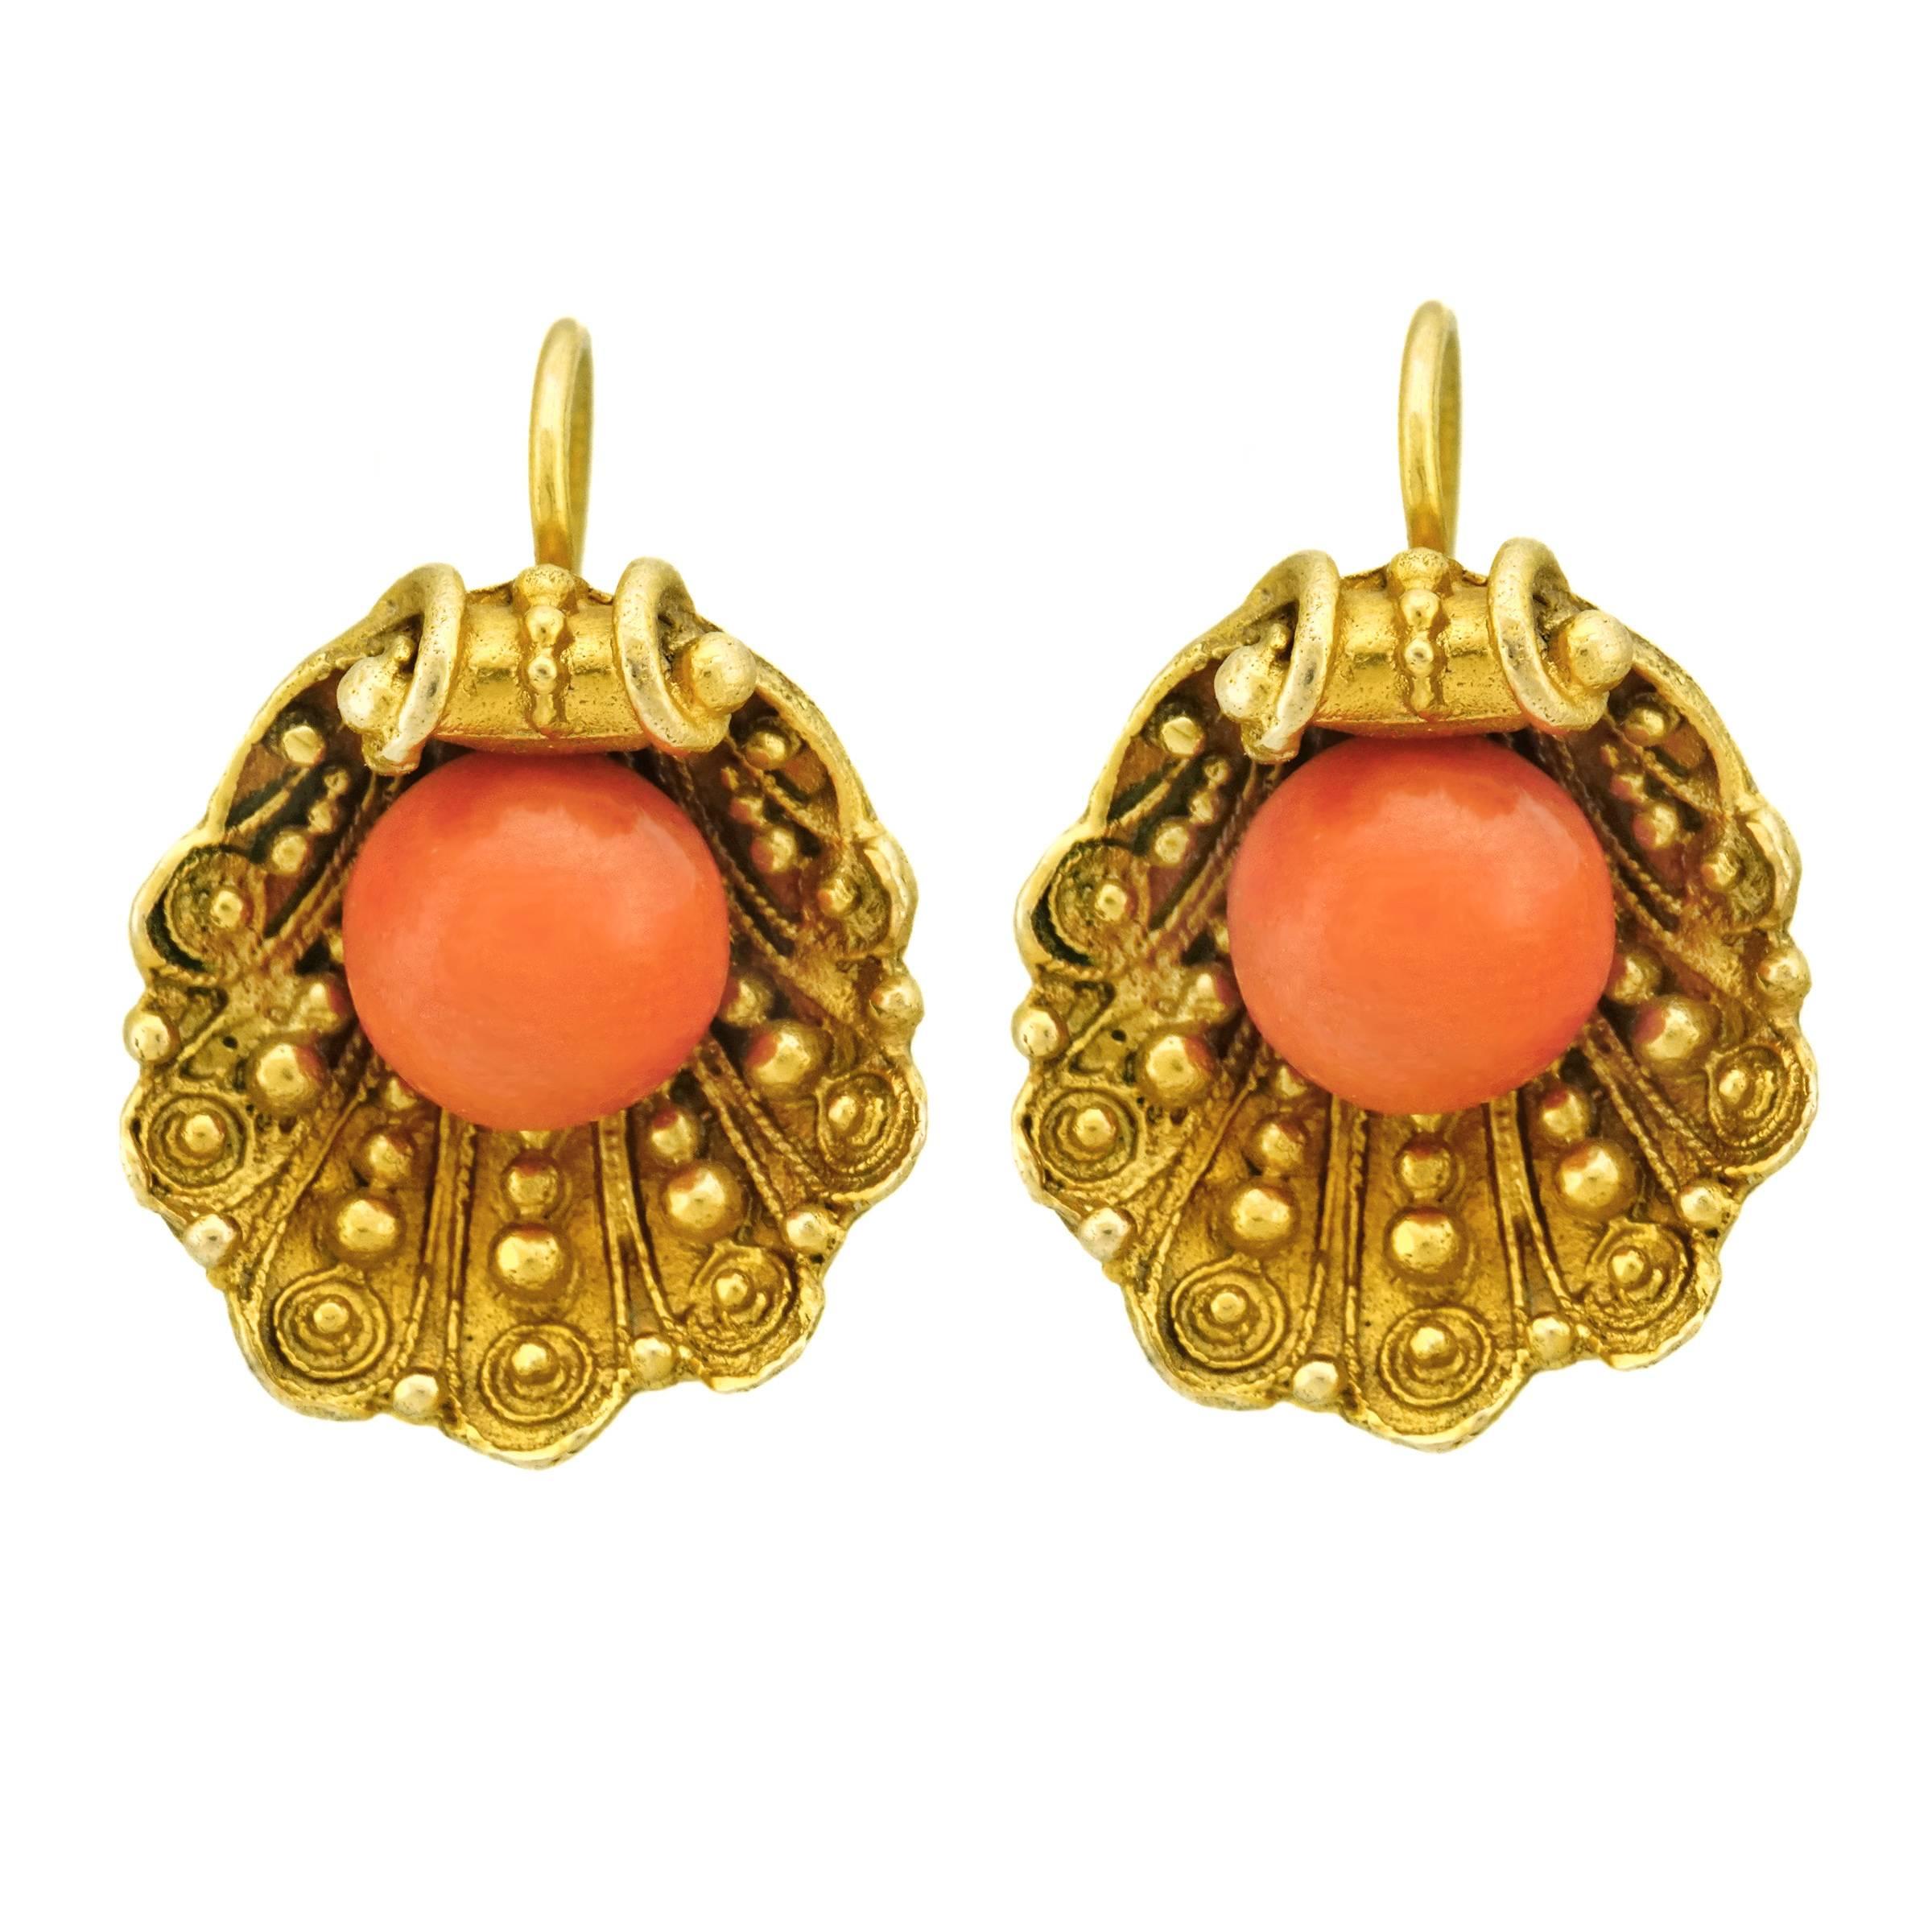 Antique Shell Form Gold Earrings